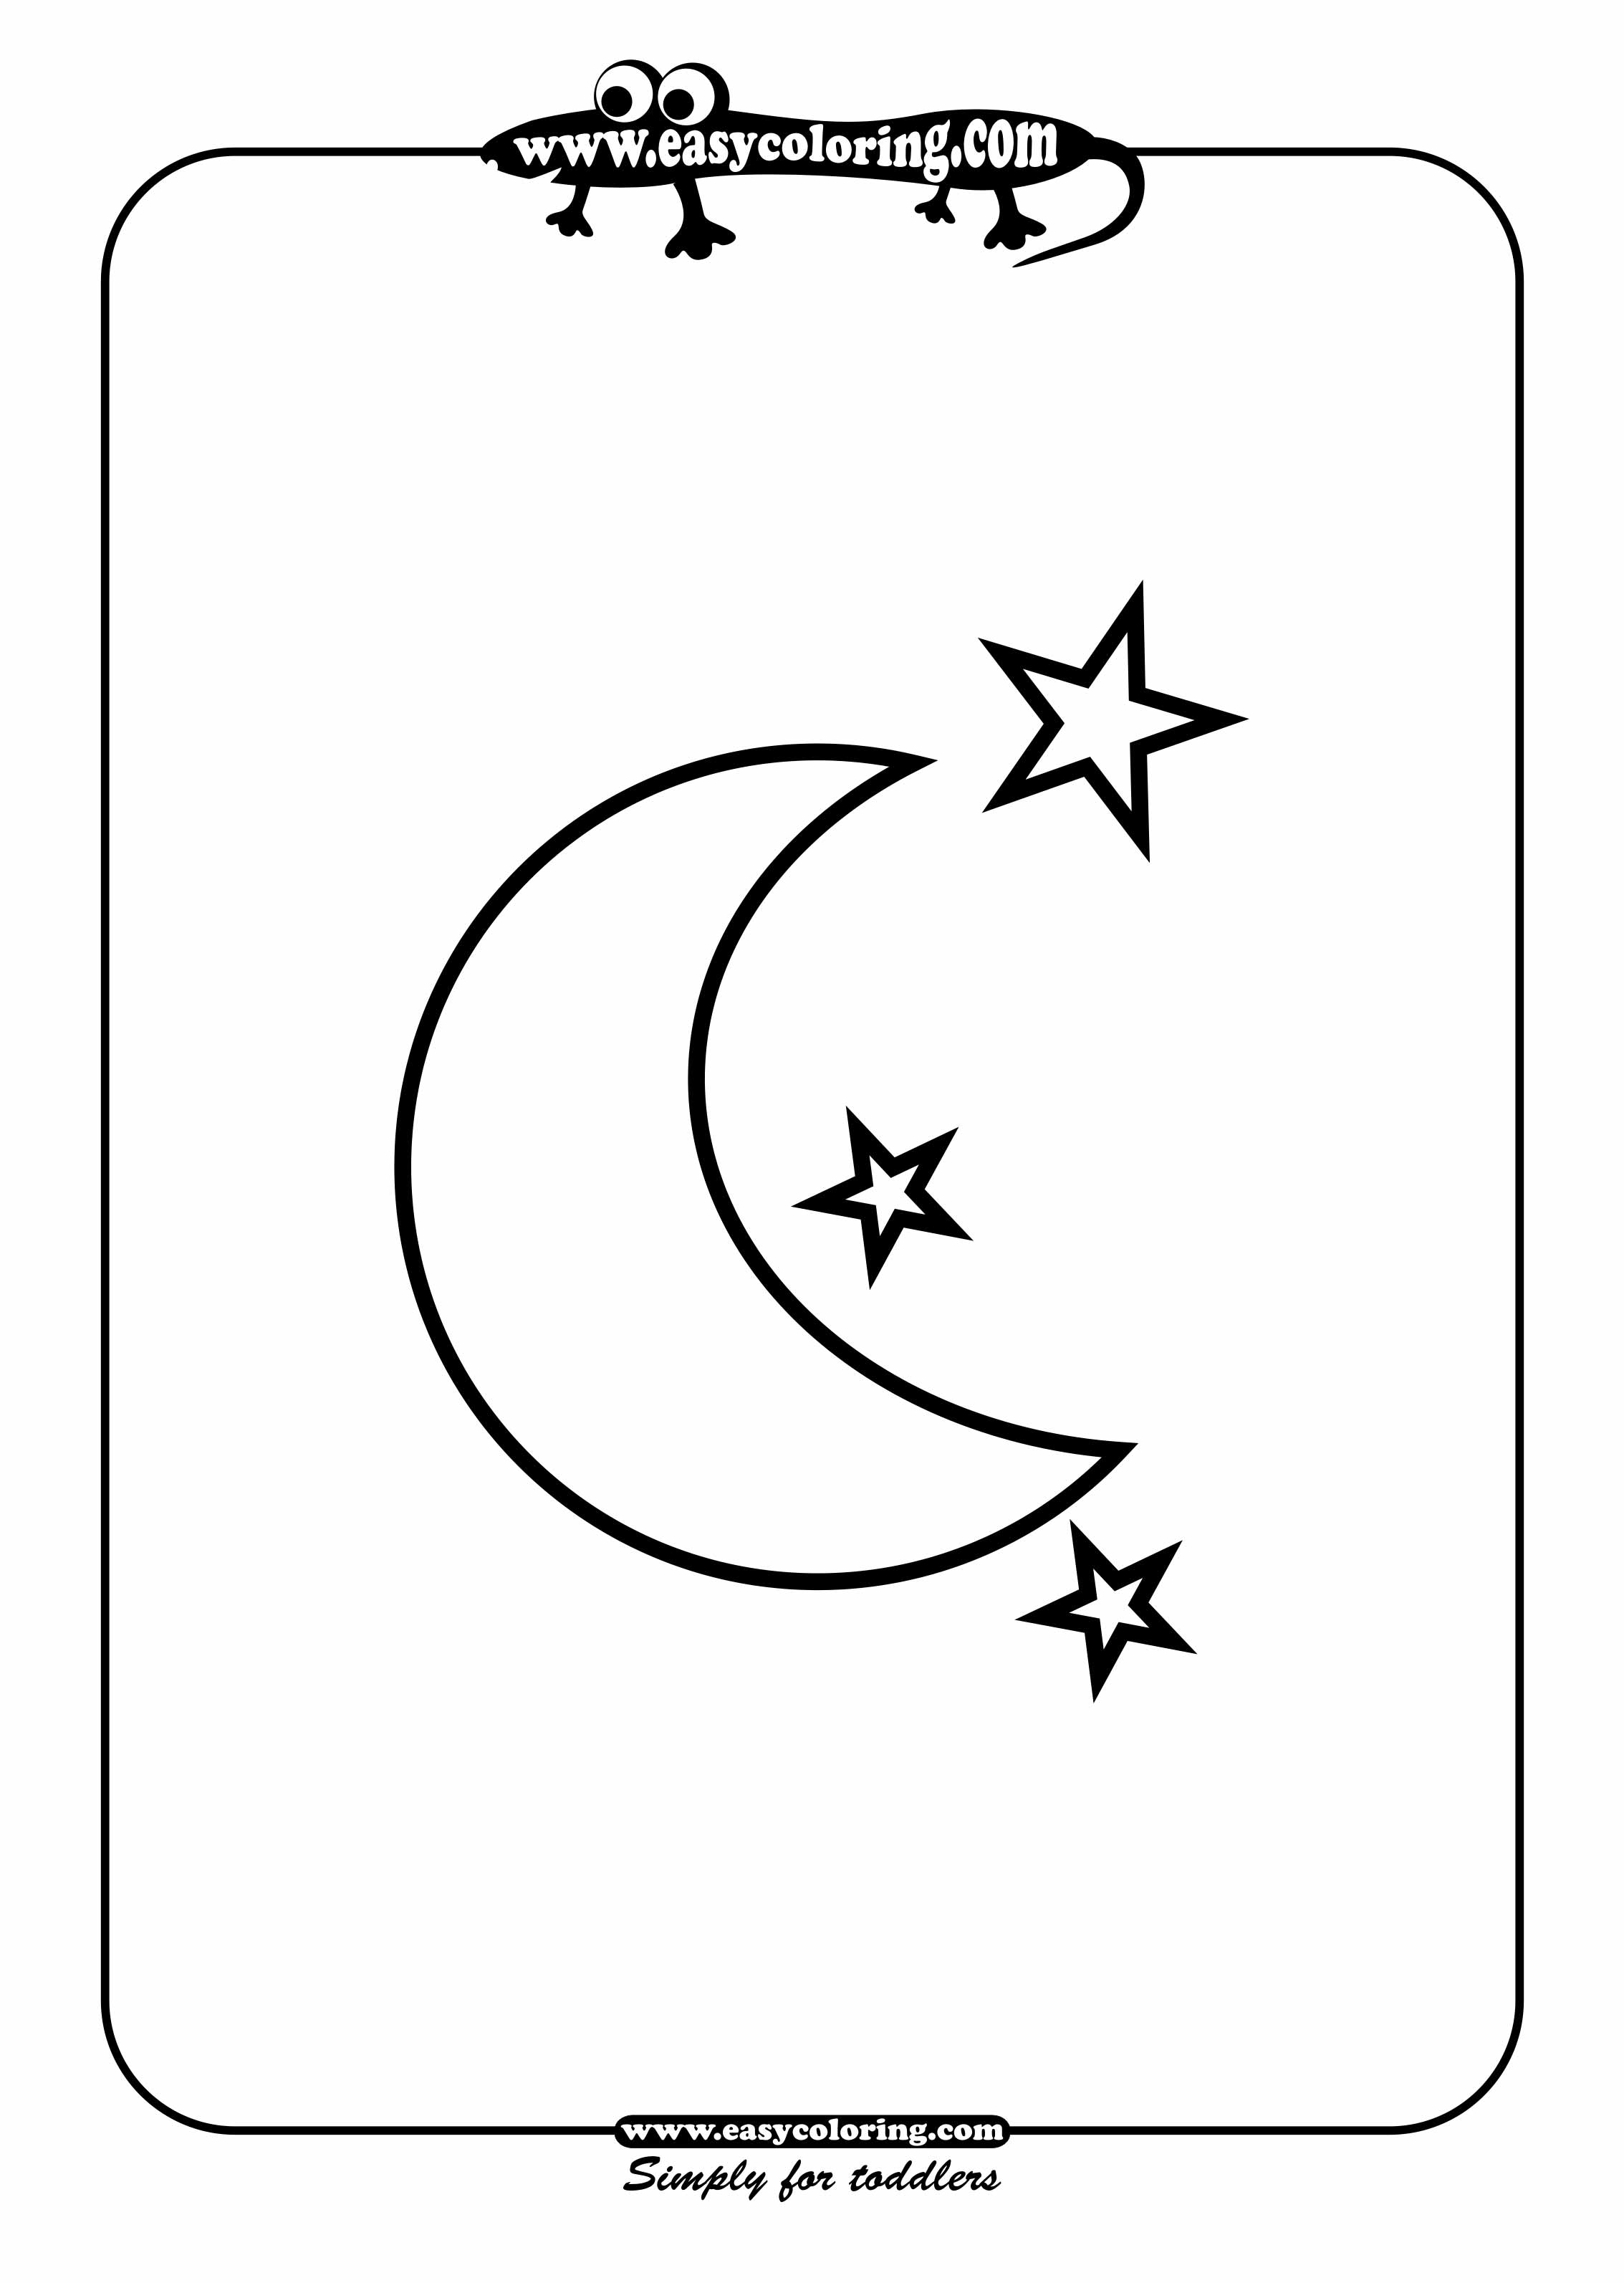 Moon and stars Simple shapes Easy coloring pages for